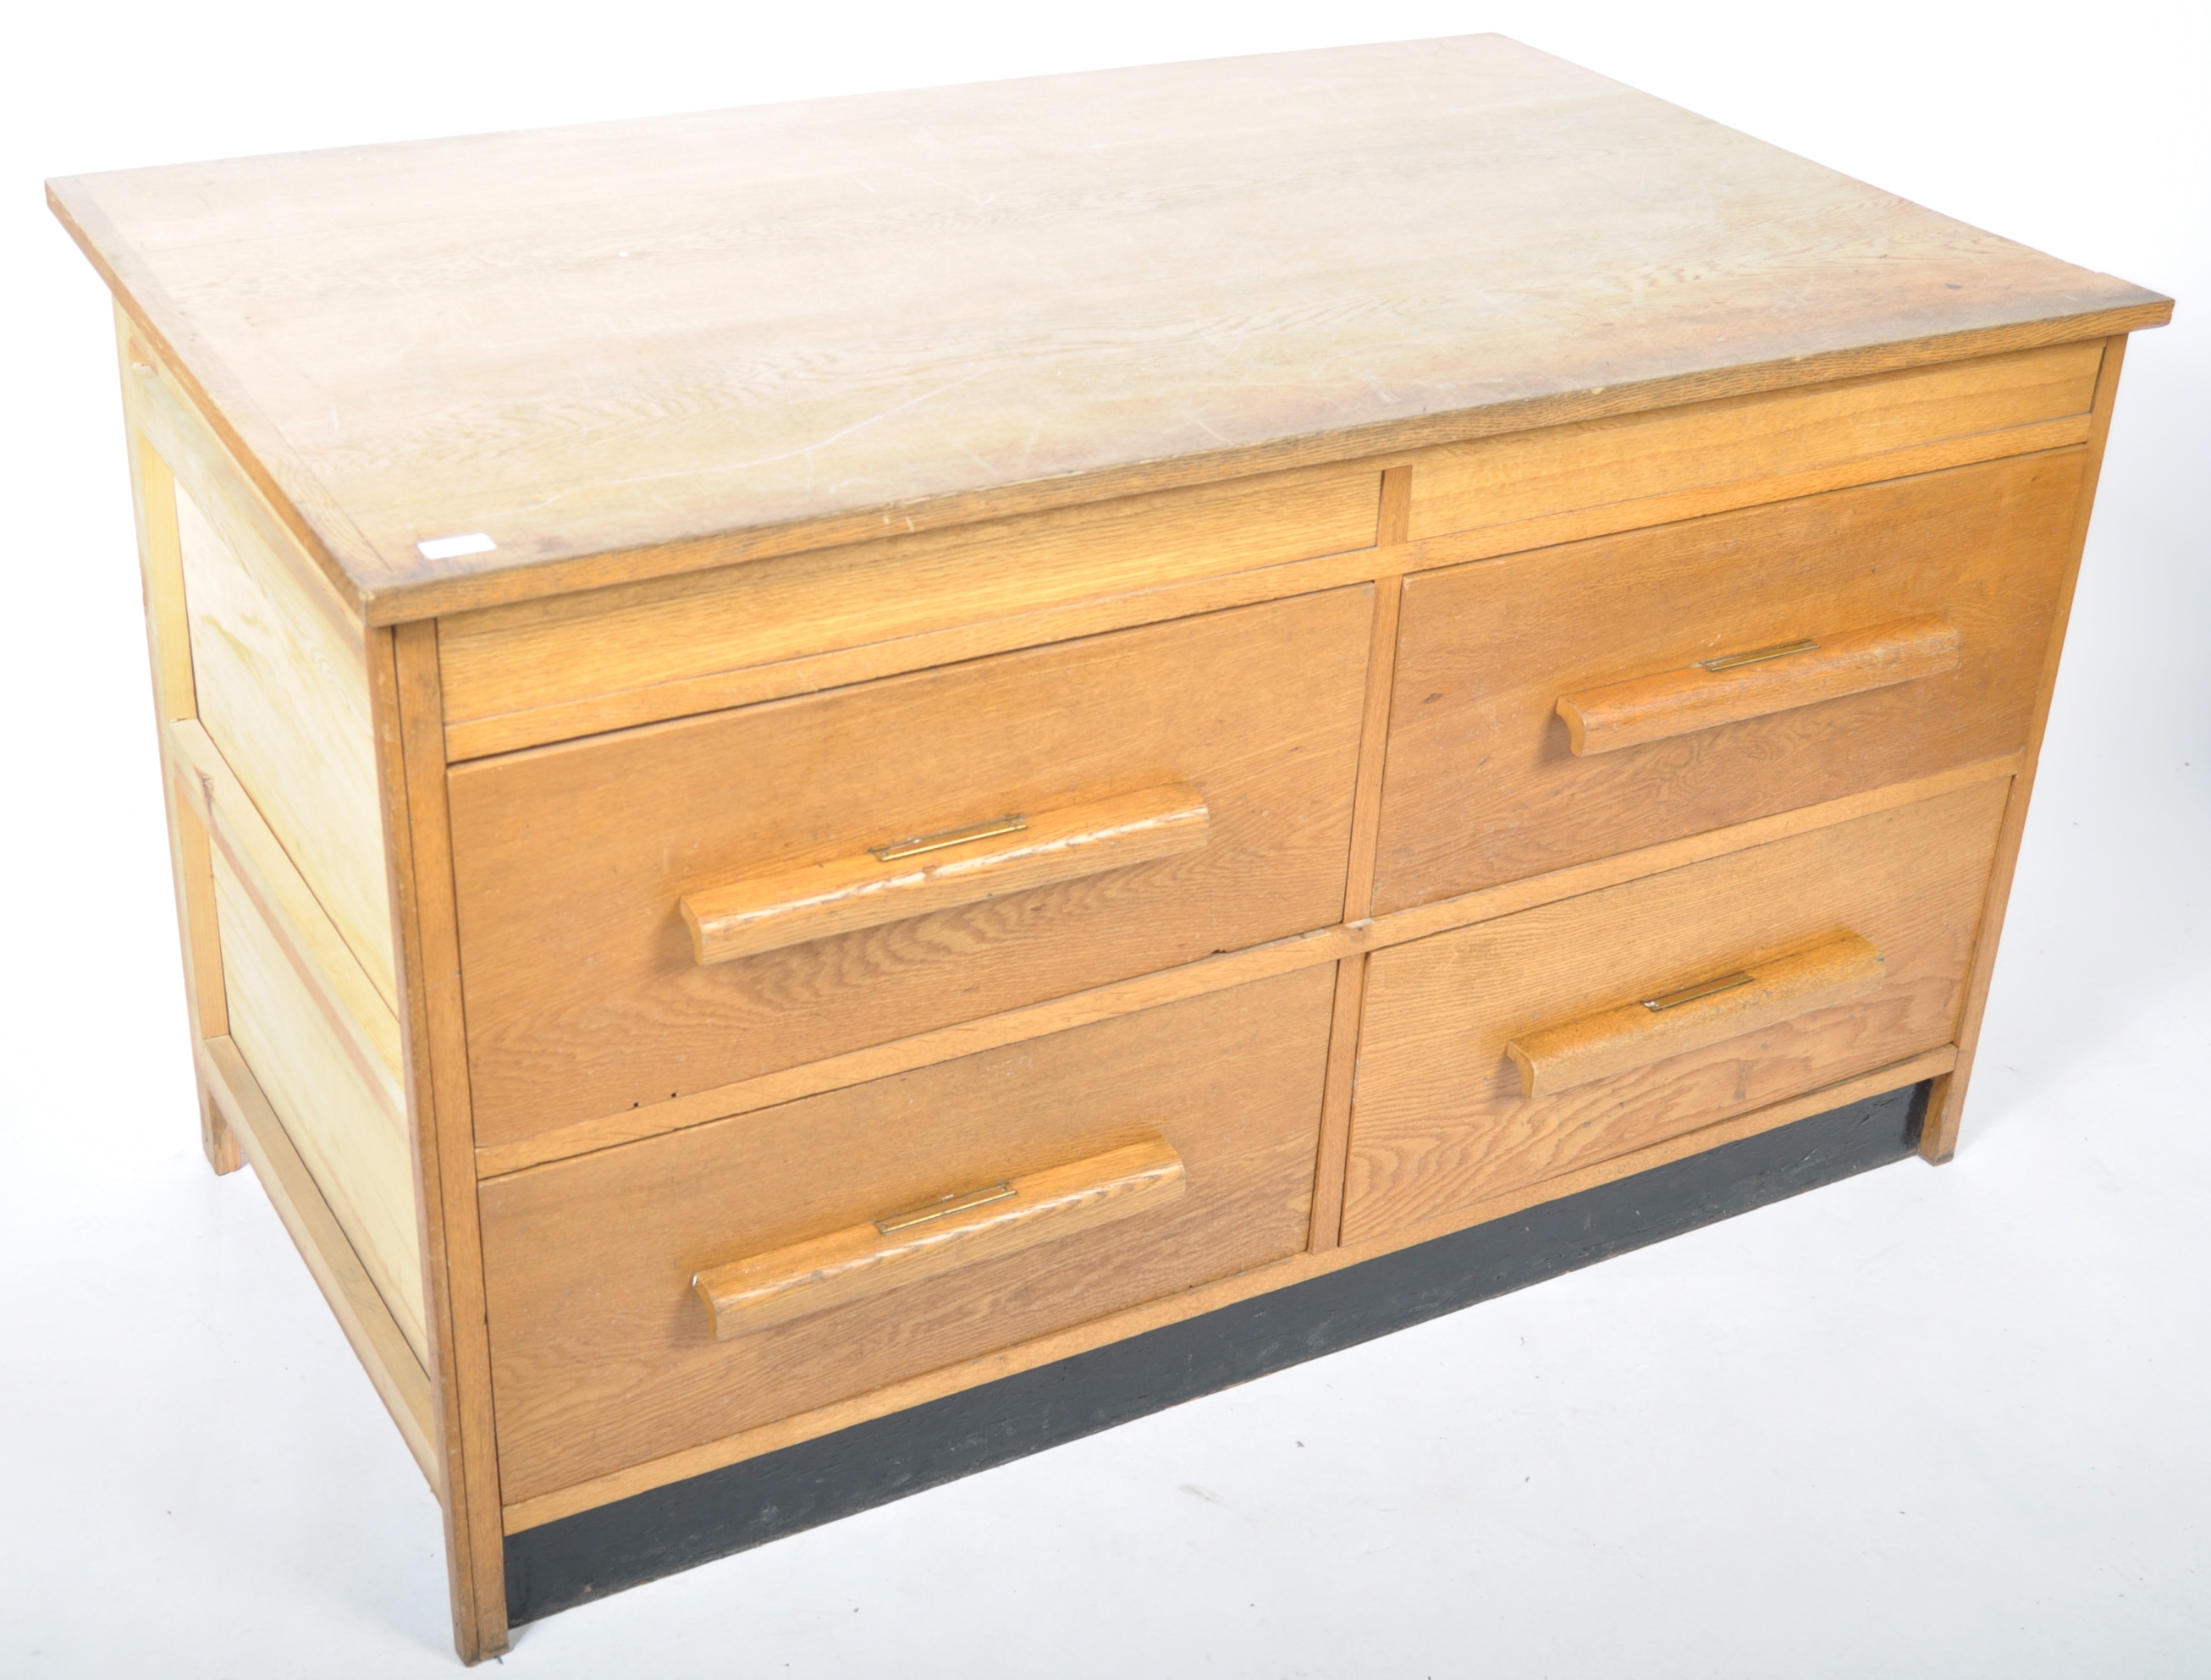 MID CENTURY GOLDEN OAK ARCHITECTS INDUSTRIAL PLAN CHEST OF DRAWERS - Image 2 of 5